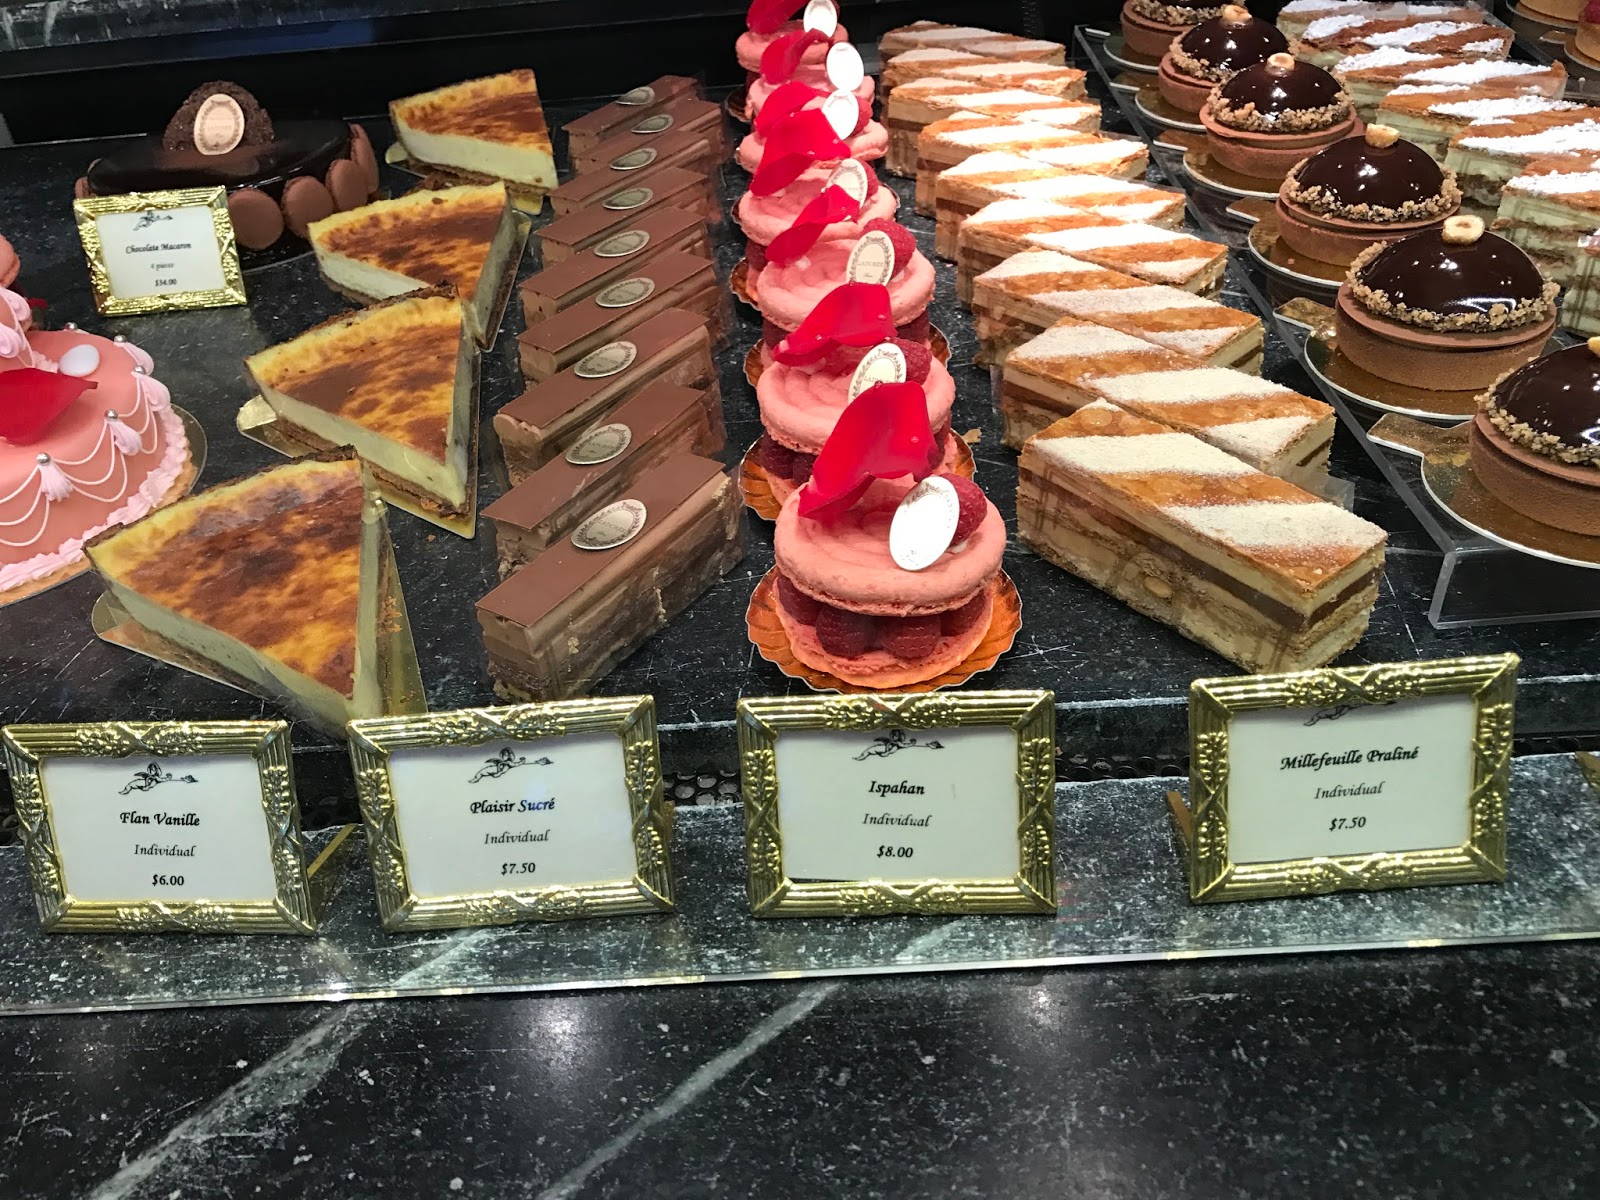 The Pastry Chef's Baking: NYC Bakery Review - Laduree Madison